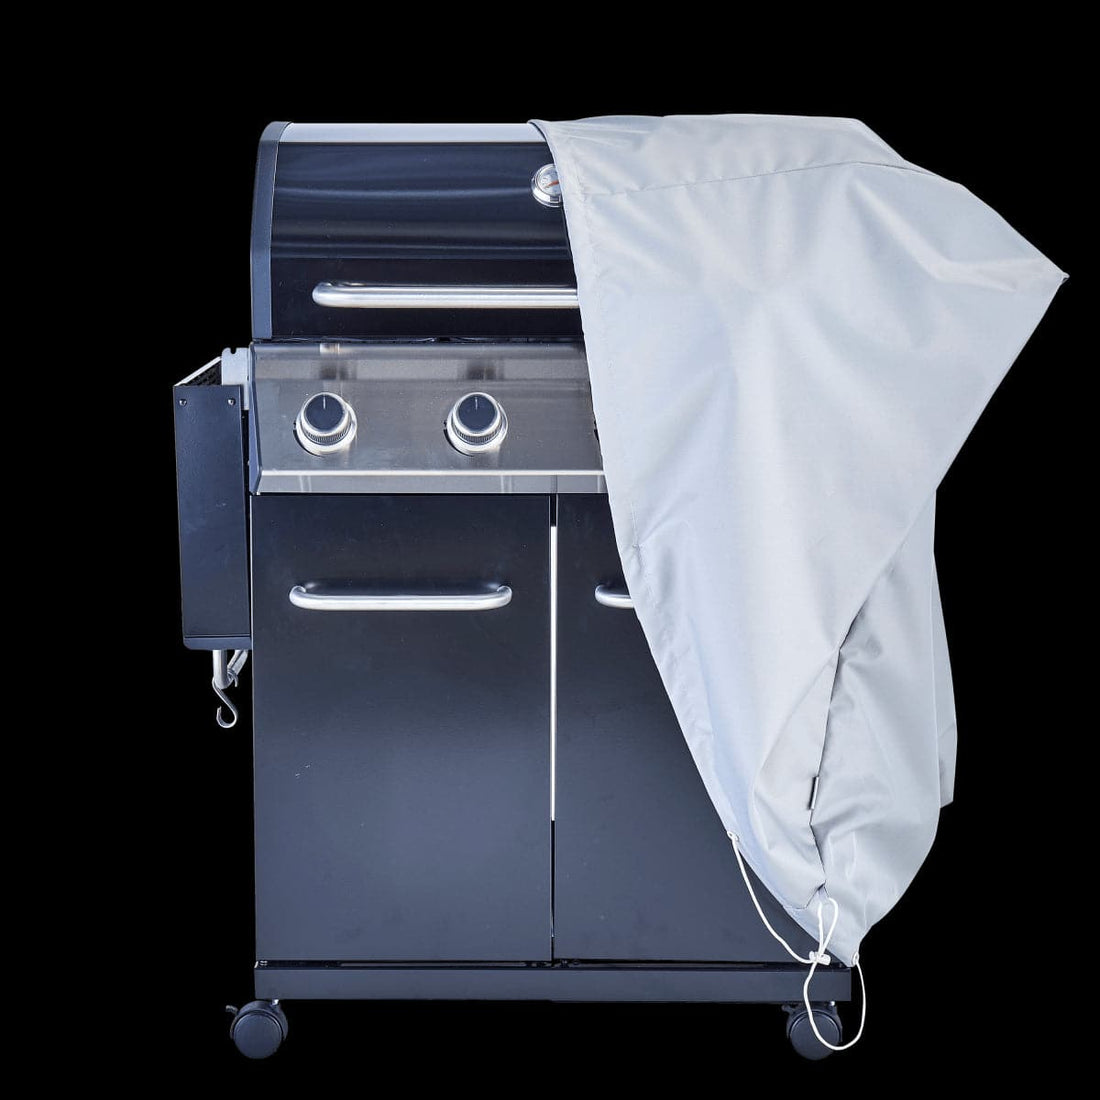 COVER FOR GAS BBQ WITH 4 BURNERS 96X57X97CM LIGHT GREY - best price from Maltashopper.com BR500013677